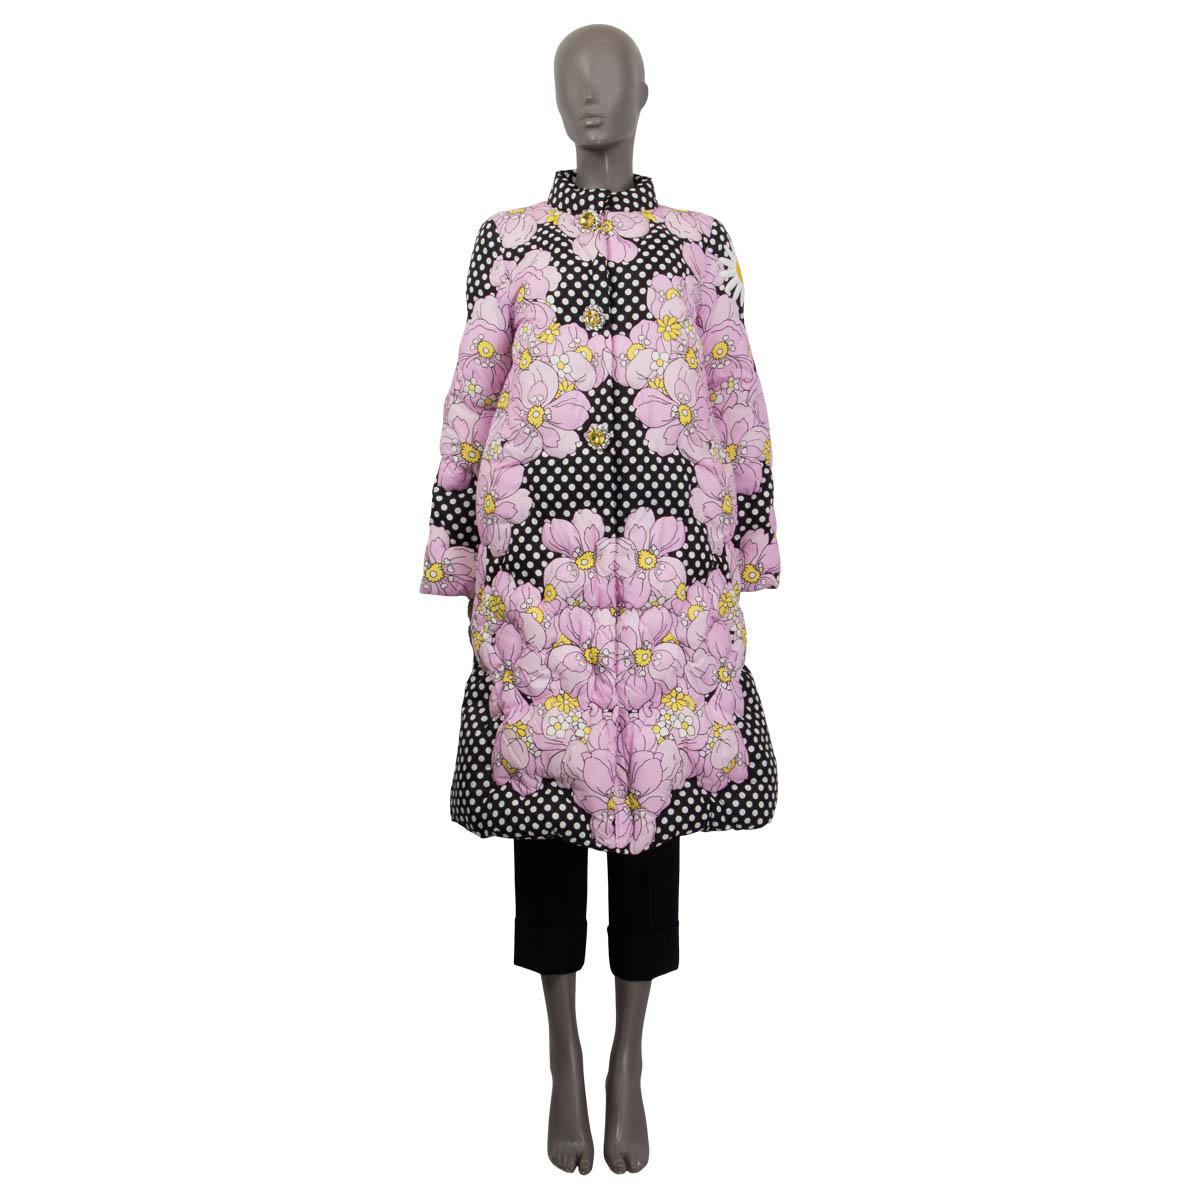 100% authentic Moncler x Richard Quinn puffer coat in pink ,black, white and yellow polyamide (100%). Features a flower and polka dots print, a high neck and crystal flower buttons on the front. Has two zip pockets on the sides. Opens with push